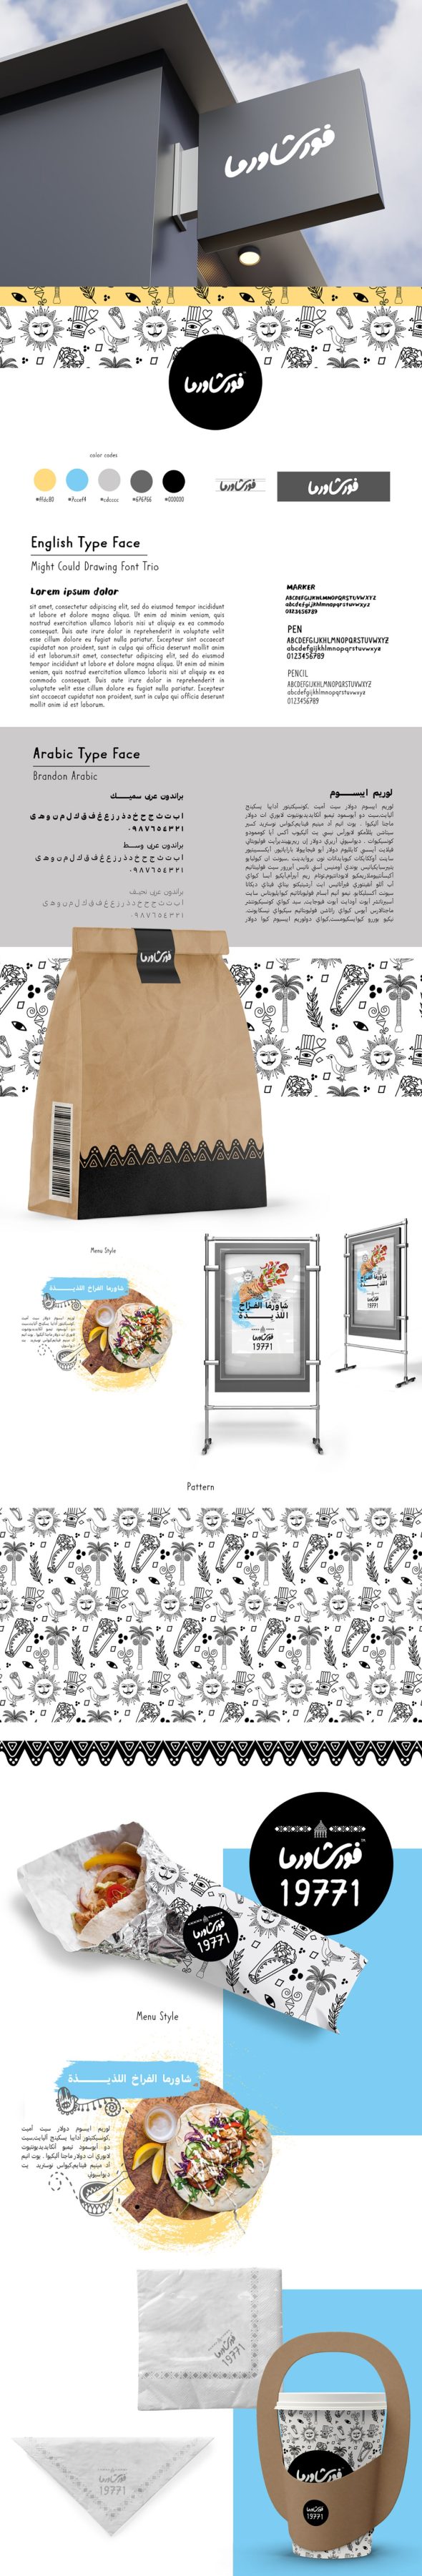 Shawarma place logo design and packaging design with good presentation